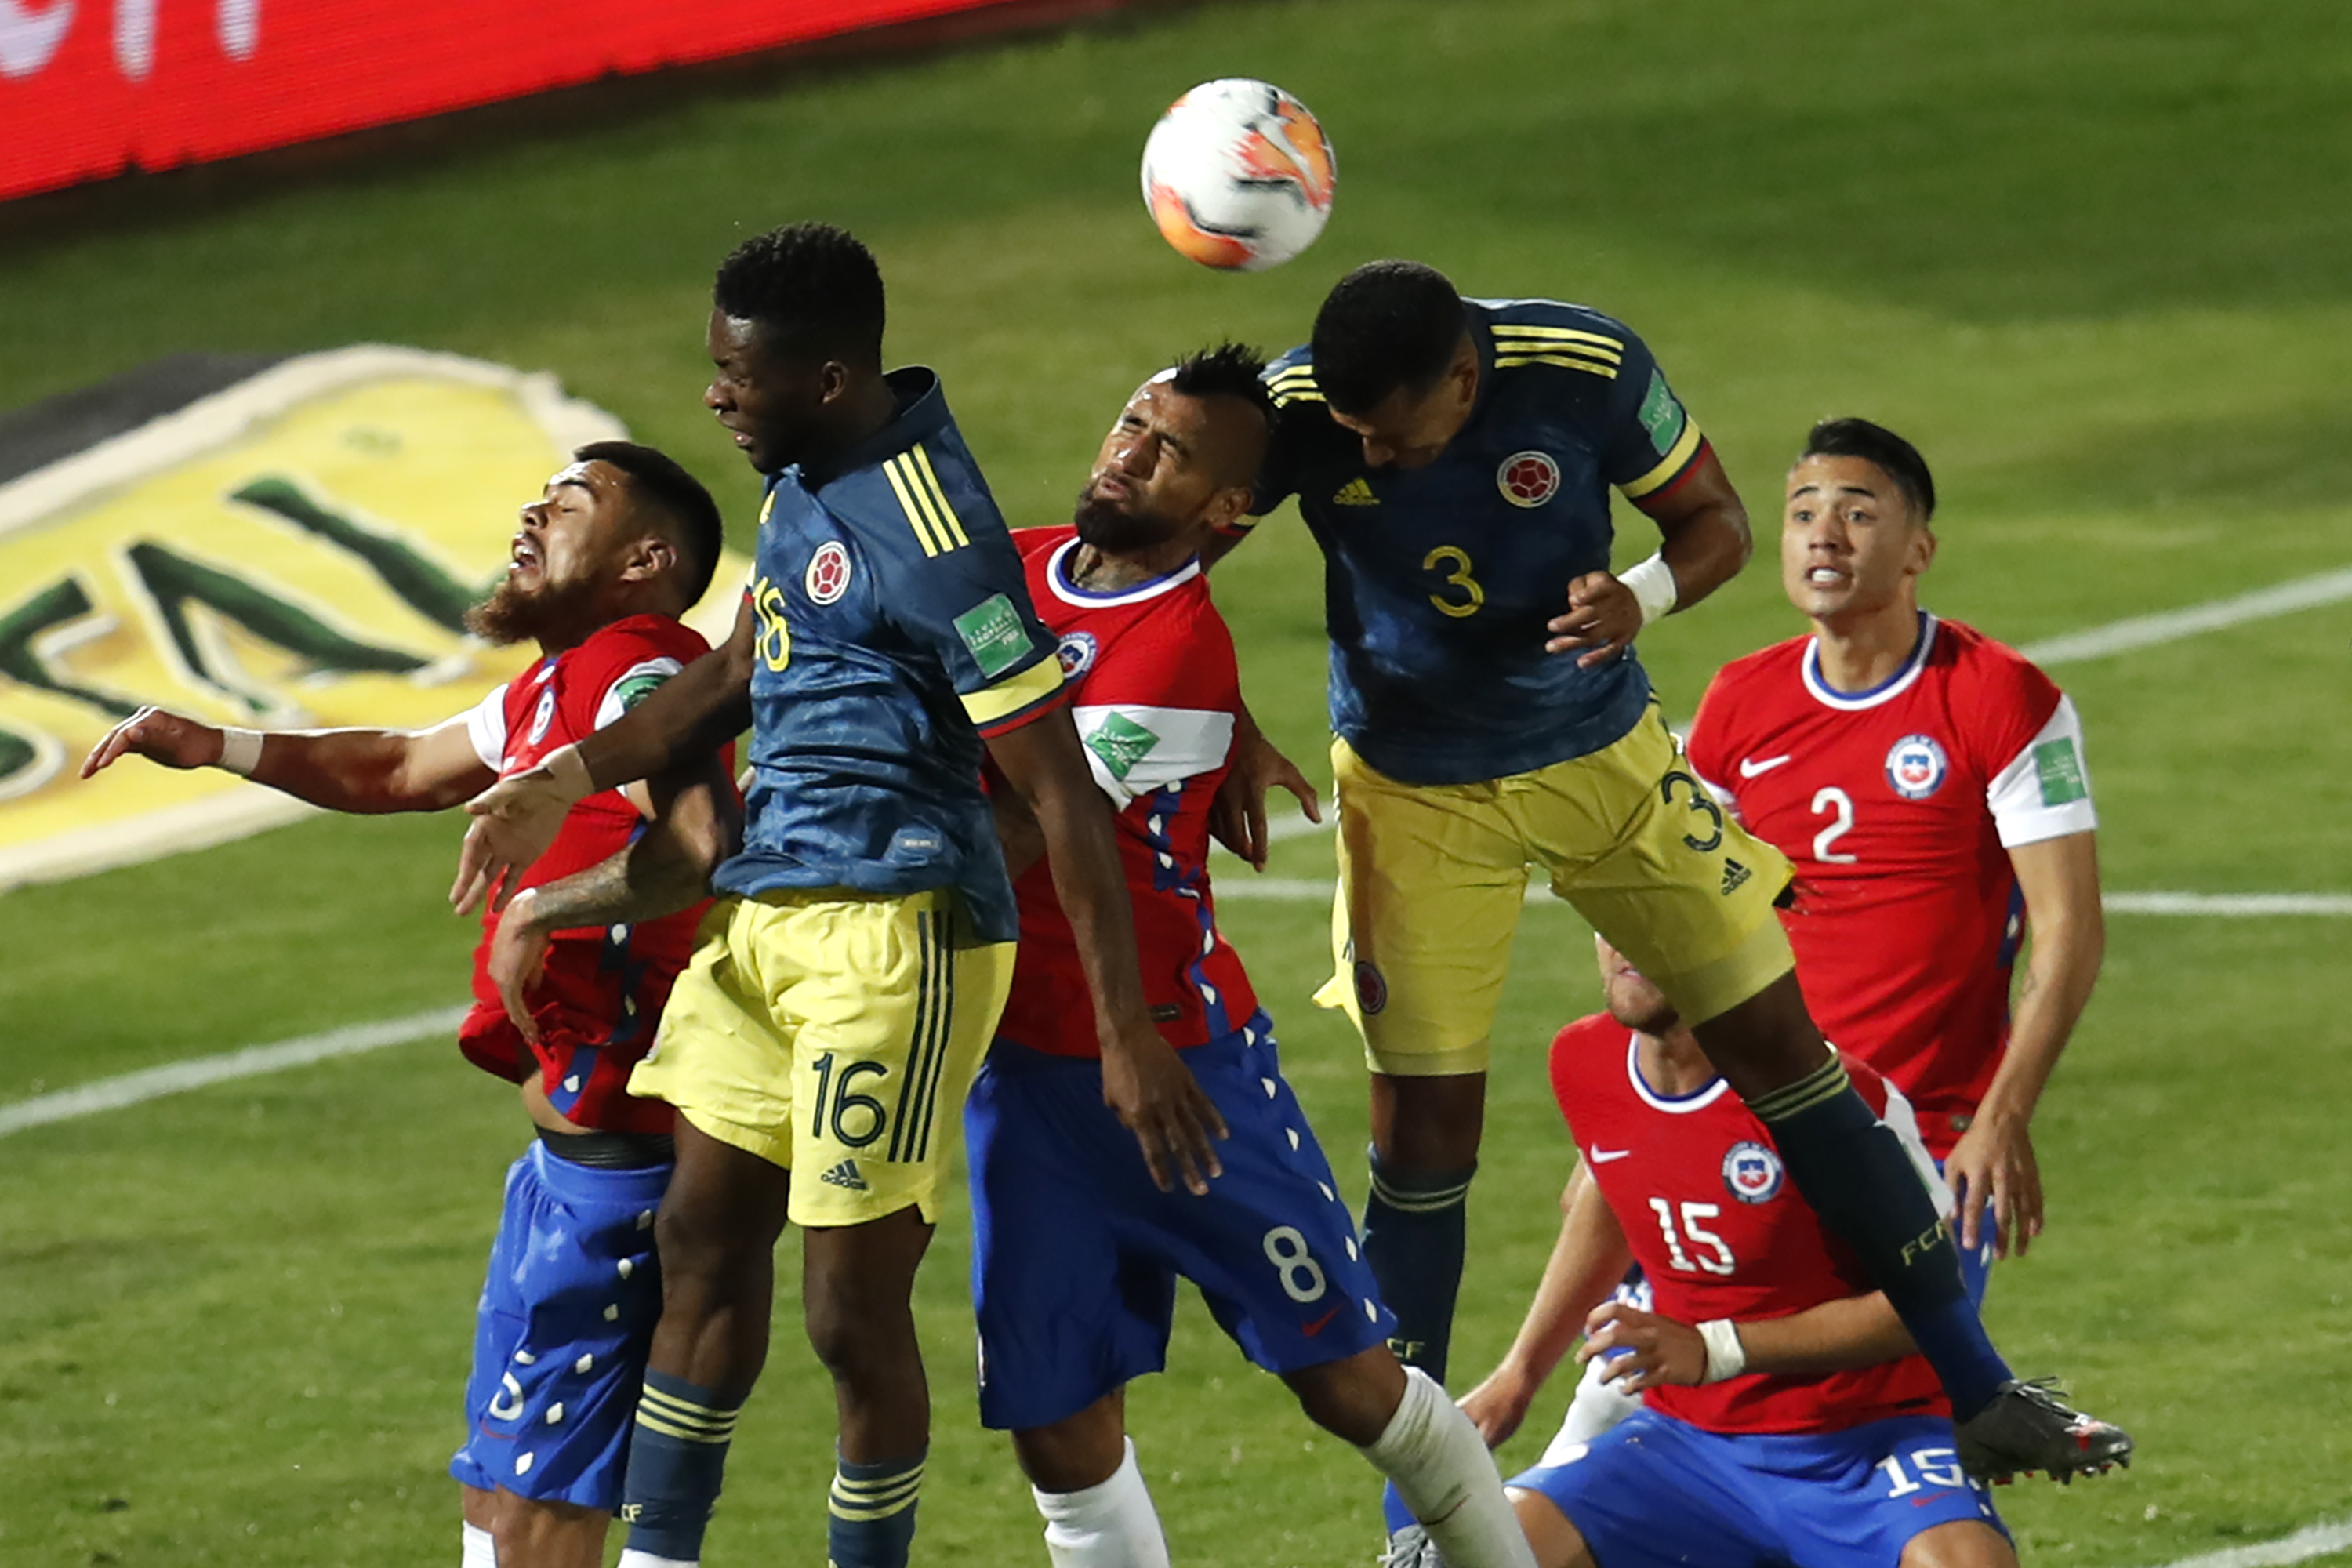 Chile V Colombia South American Qualifiers For Qatar 2022